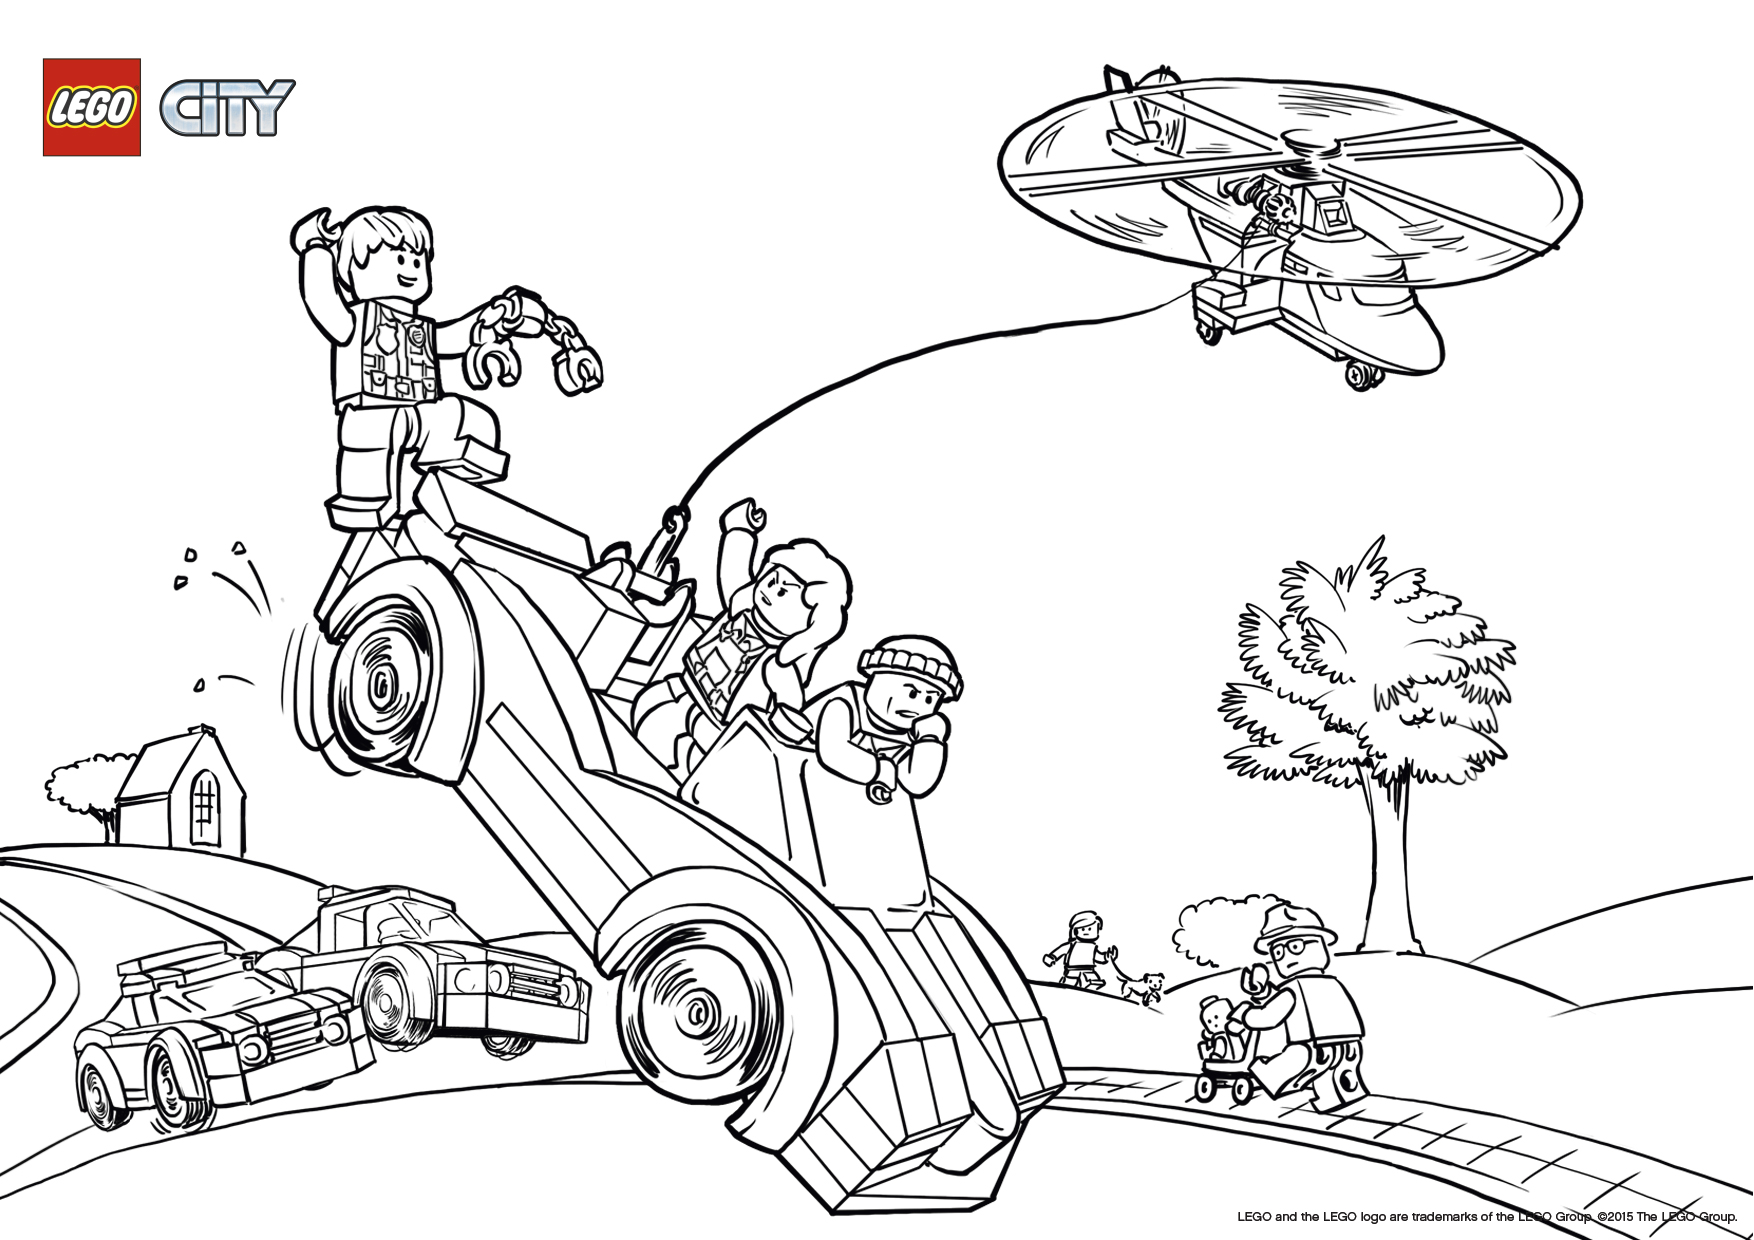 Lego city dynamic coloring page